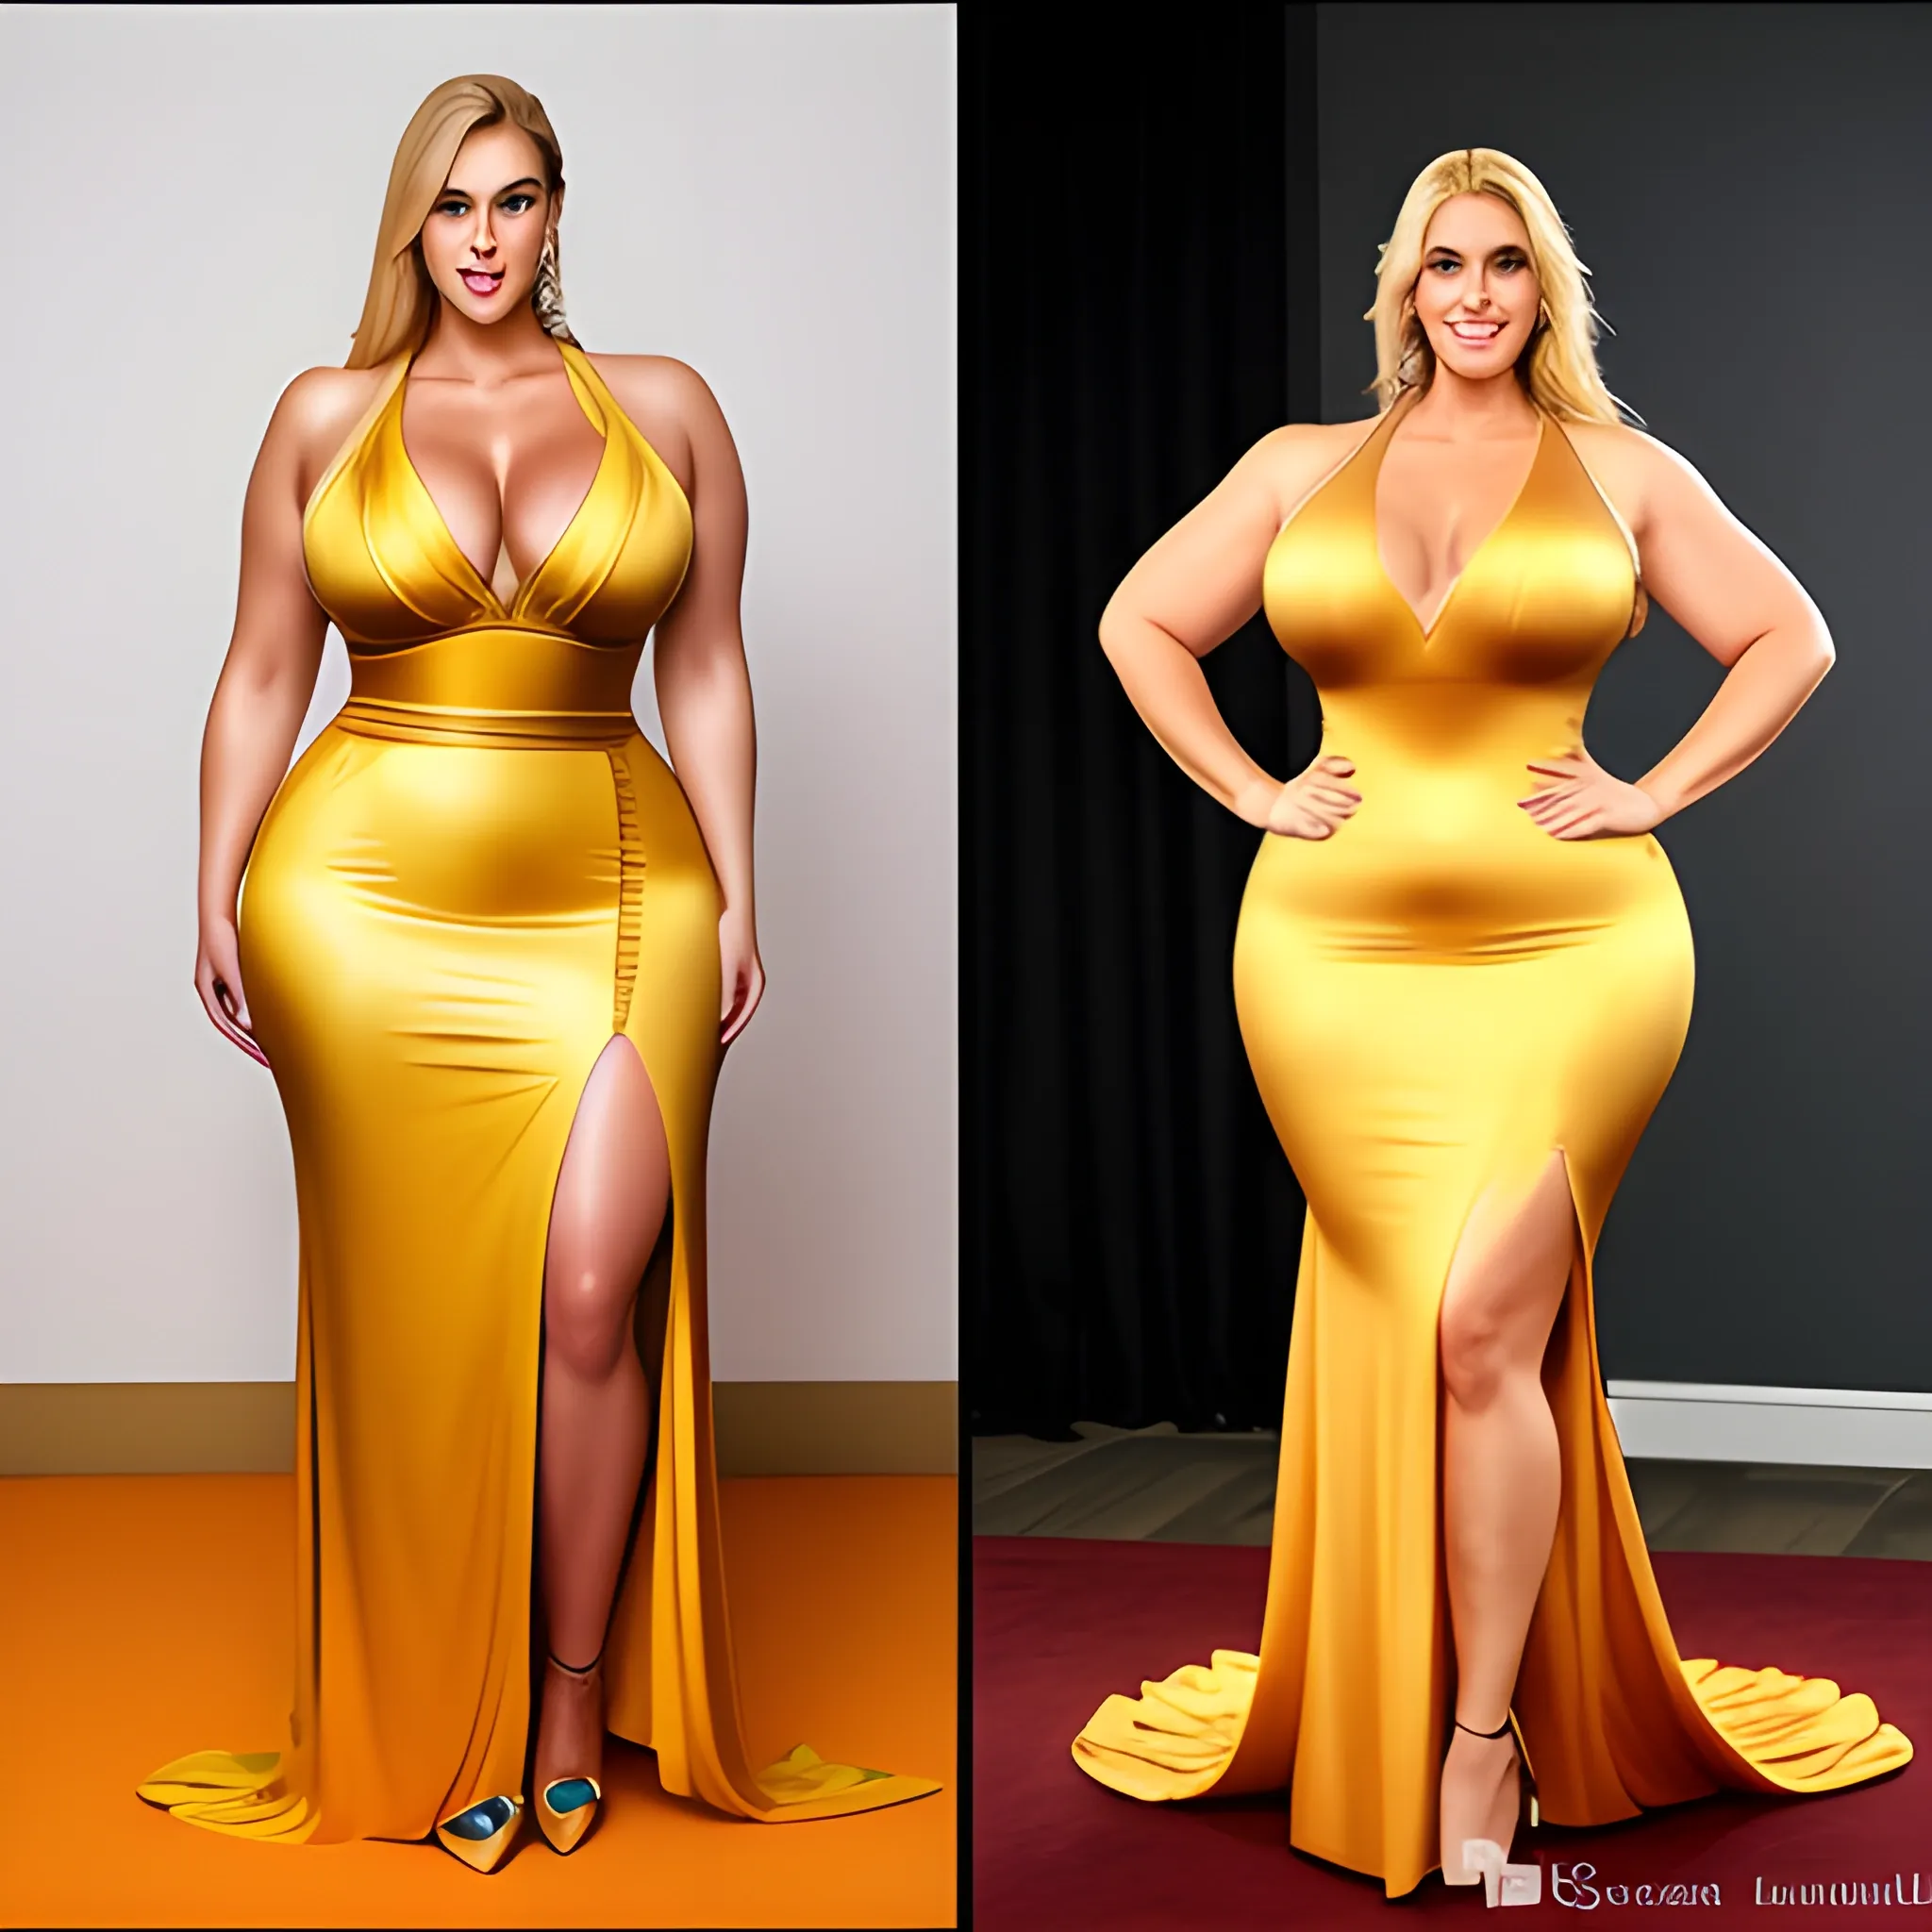 very tall plus size muscular blonde girl with small head, very b